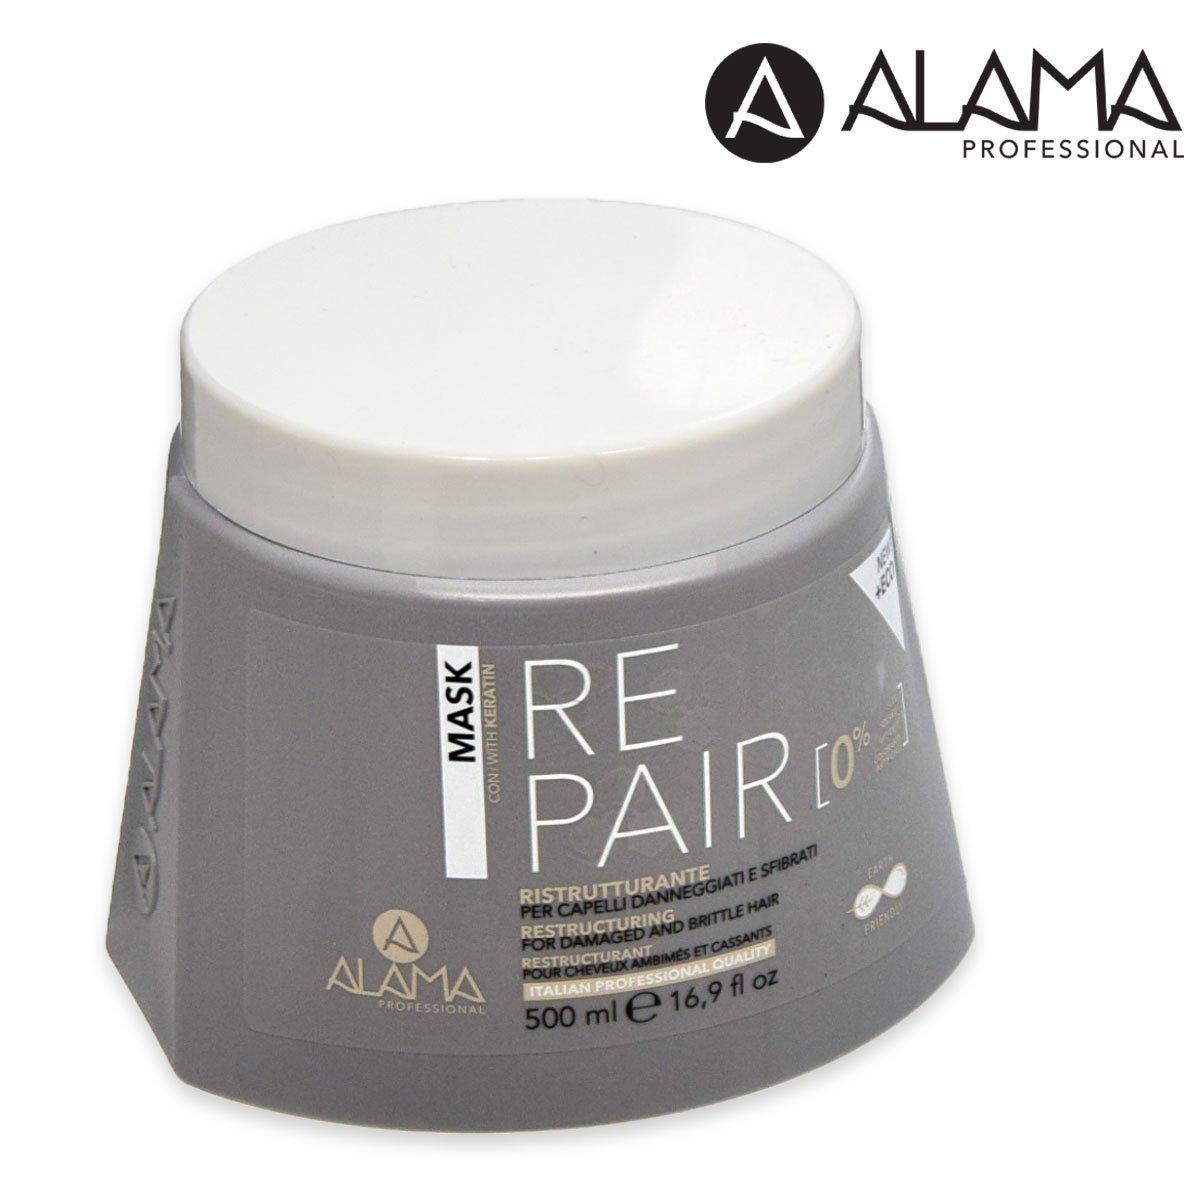 Alama professional restructuring mask for and brittle